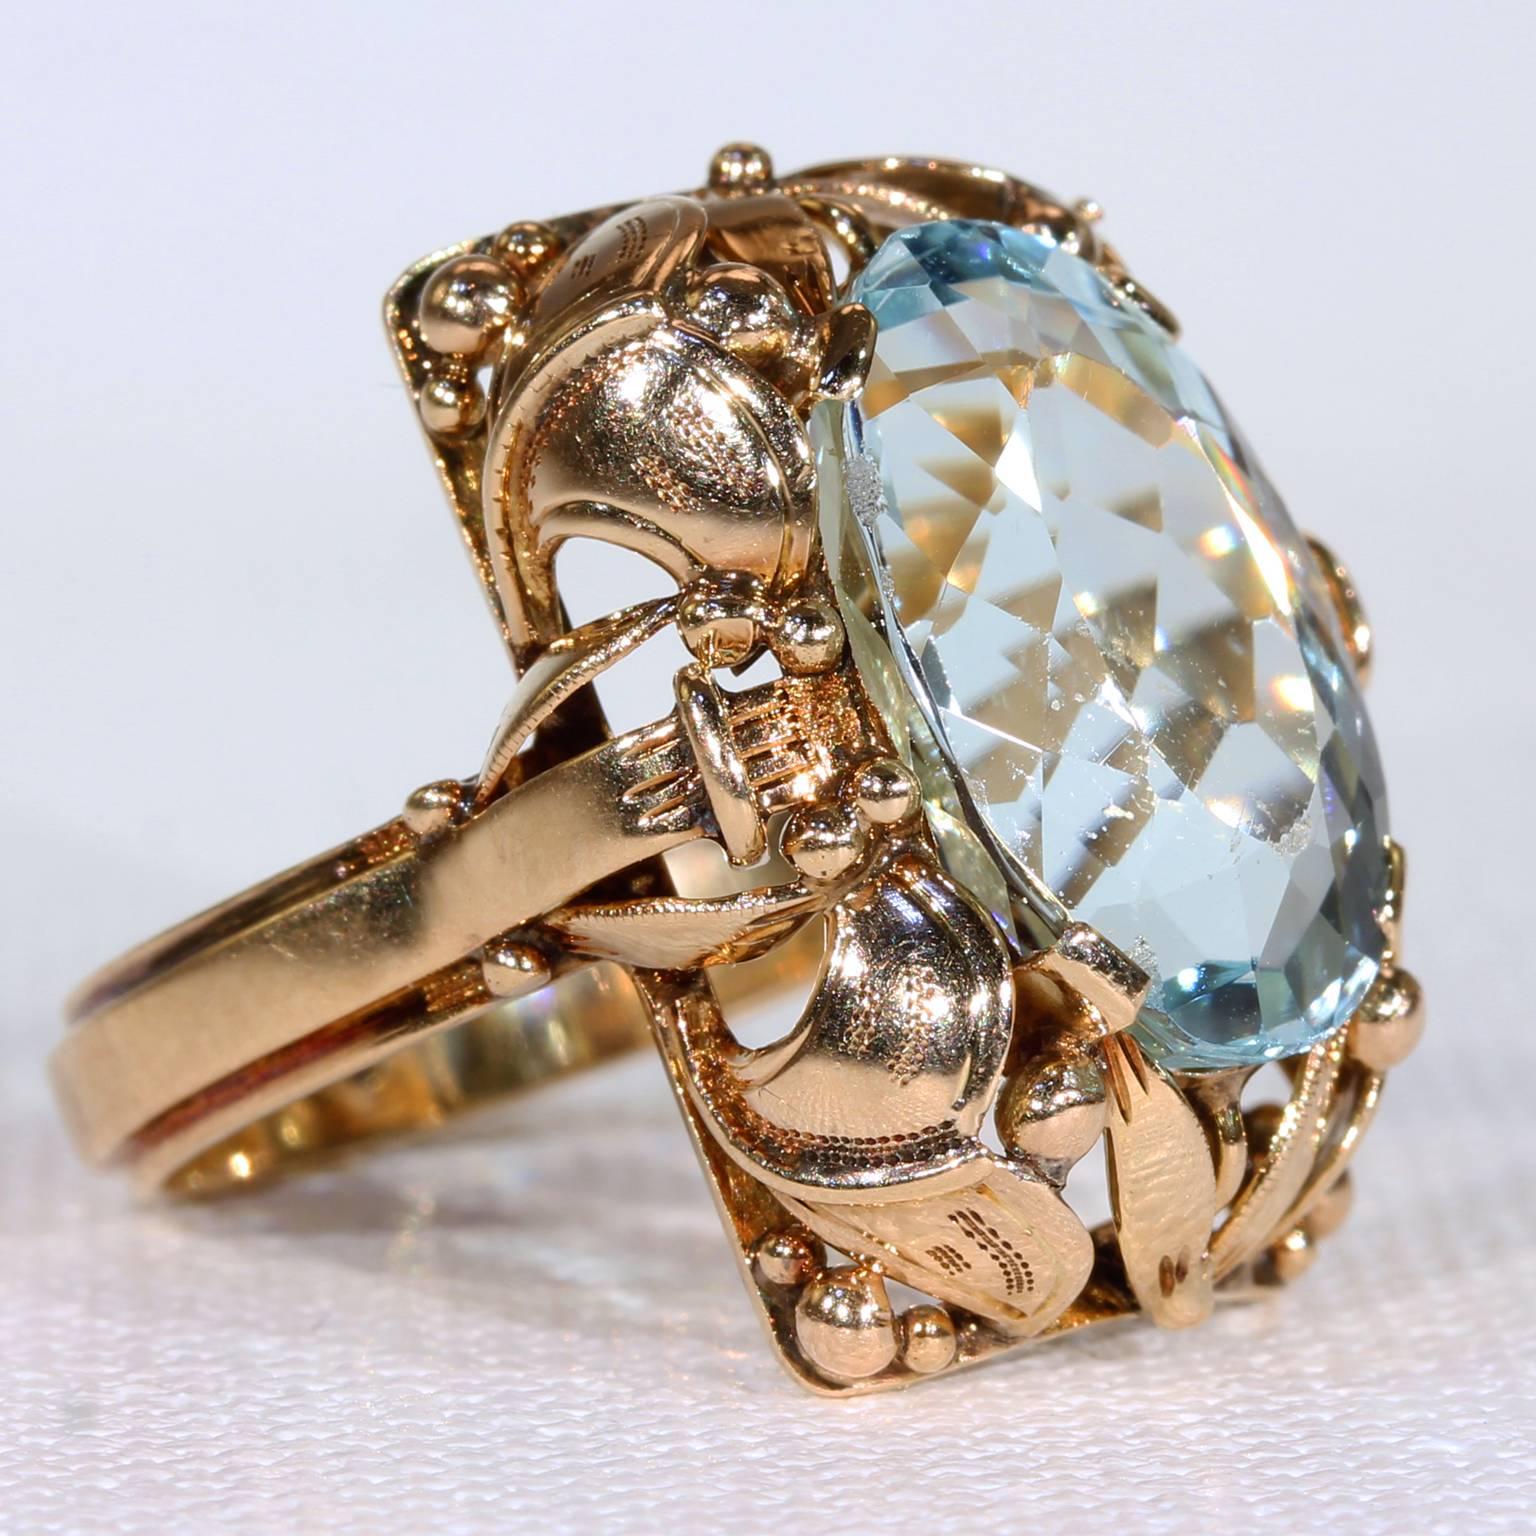 This Retro era aquamarine and gold ring was hand crafted with lovely detail around 1950. The baby blue oval aquamarine stone measures 16 x 11 x 7.8 mm and weighs approximately 7 carats. The stone is set in a 14 karat gold face which features a